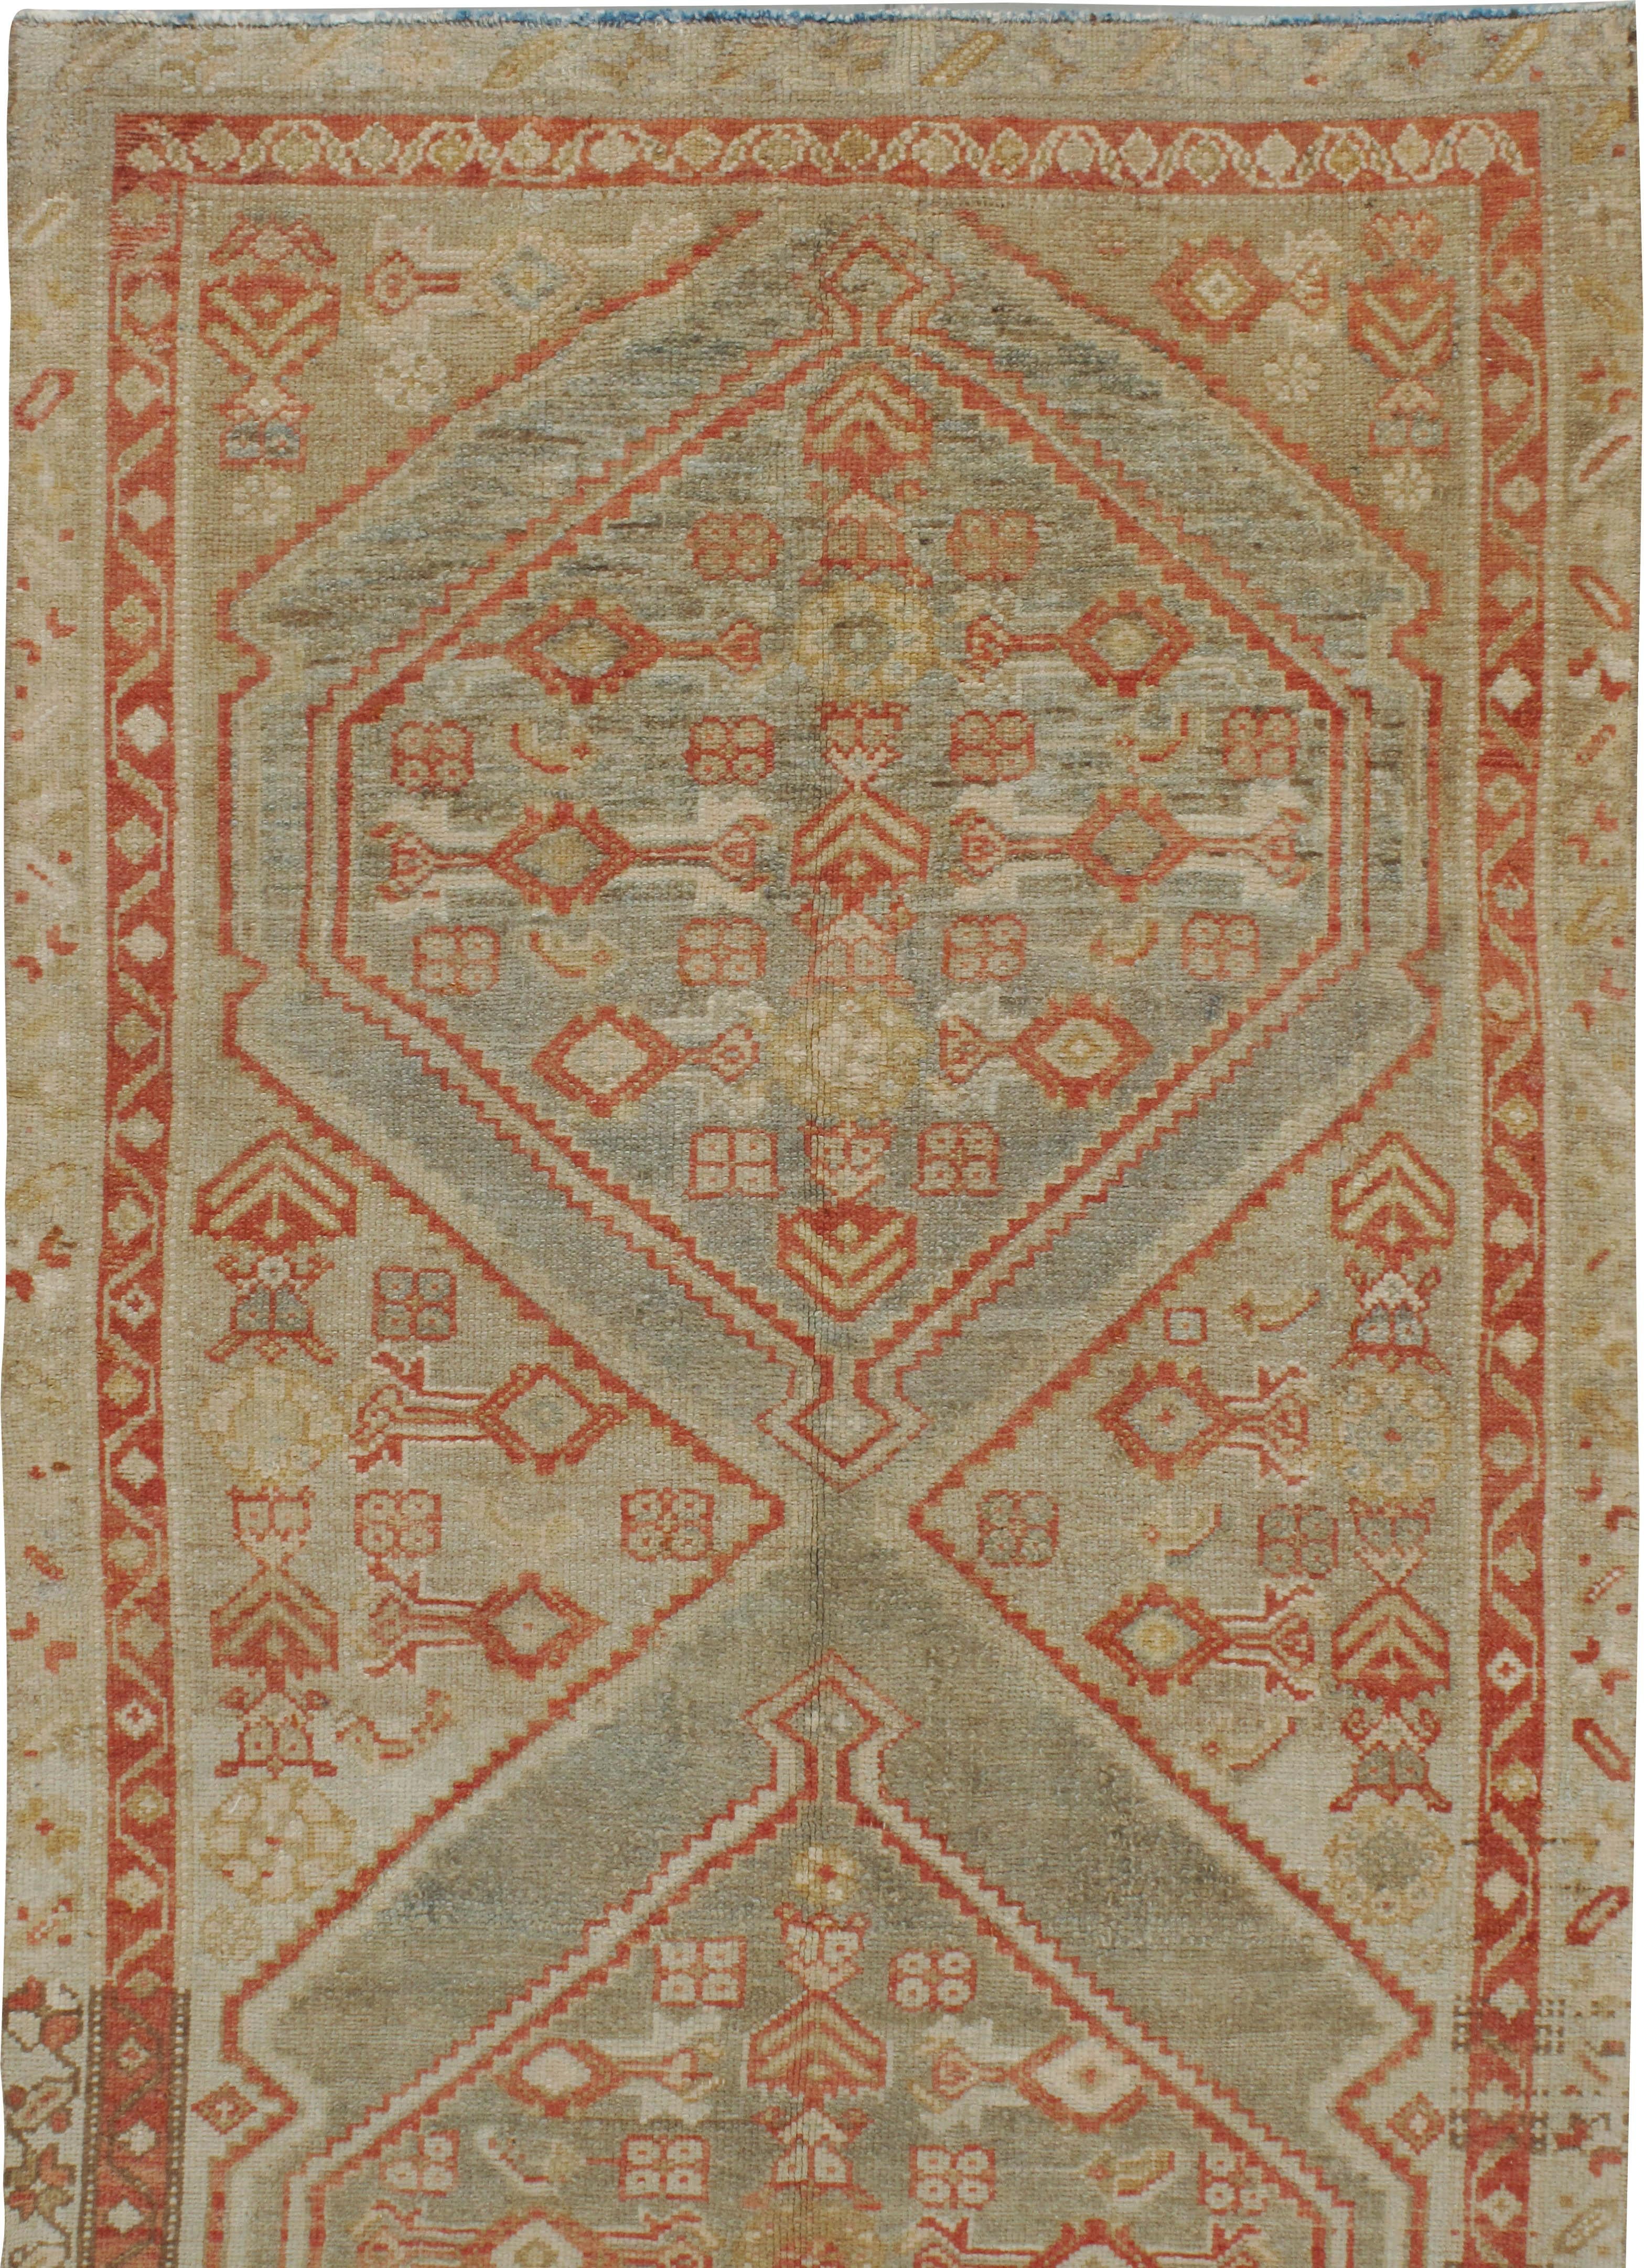 Hand-Woven Persian Malayer Runner 3'7 x 16' For Sale